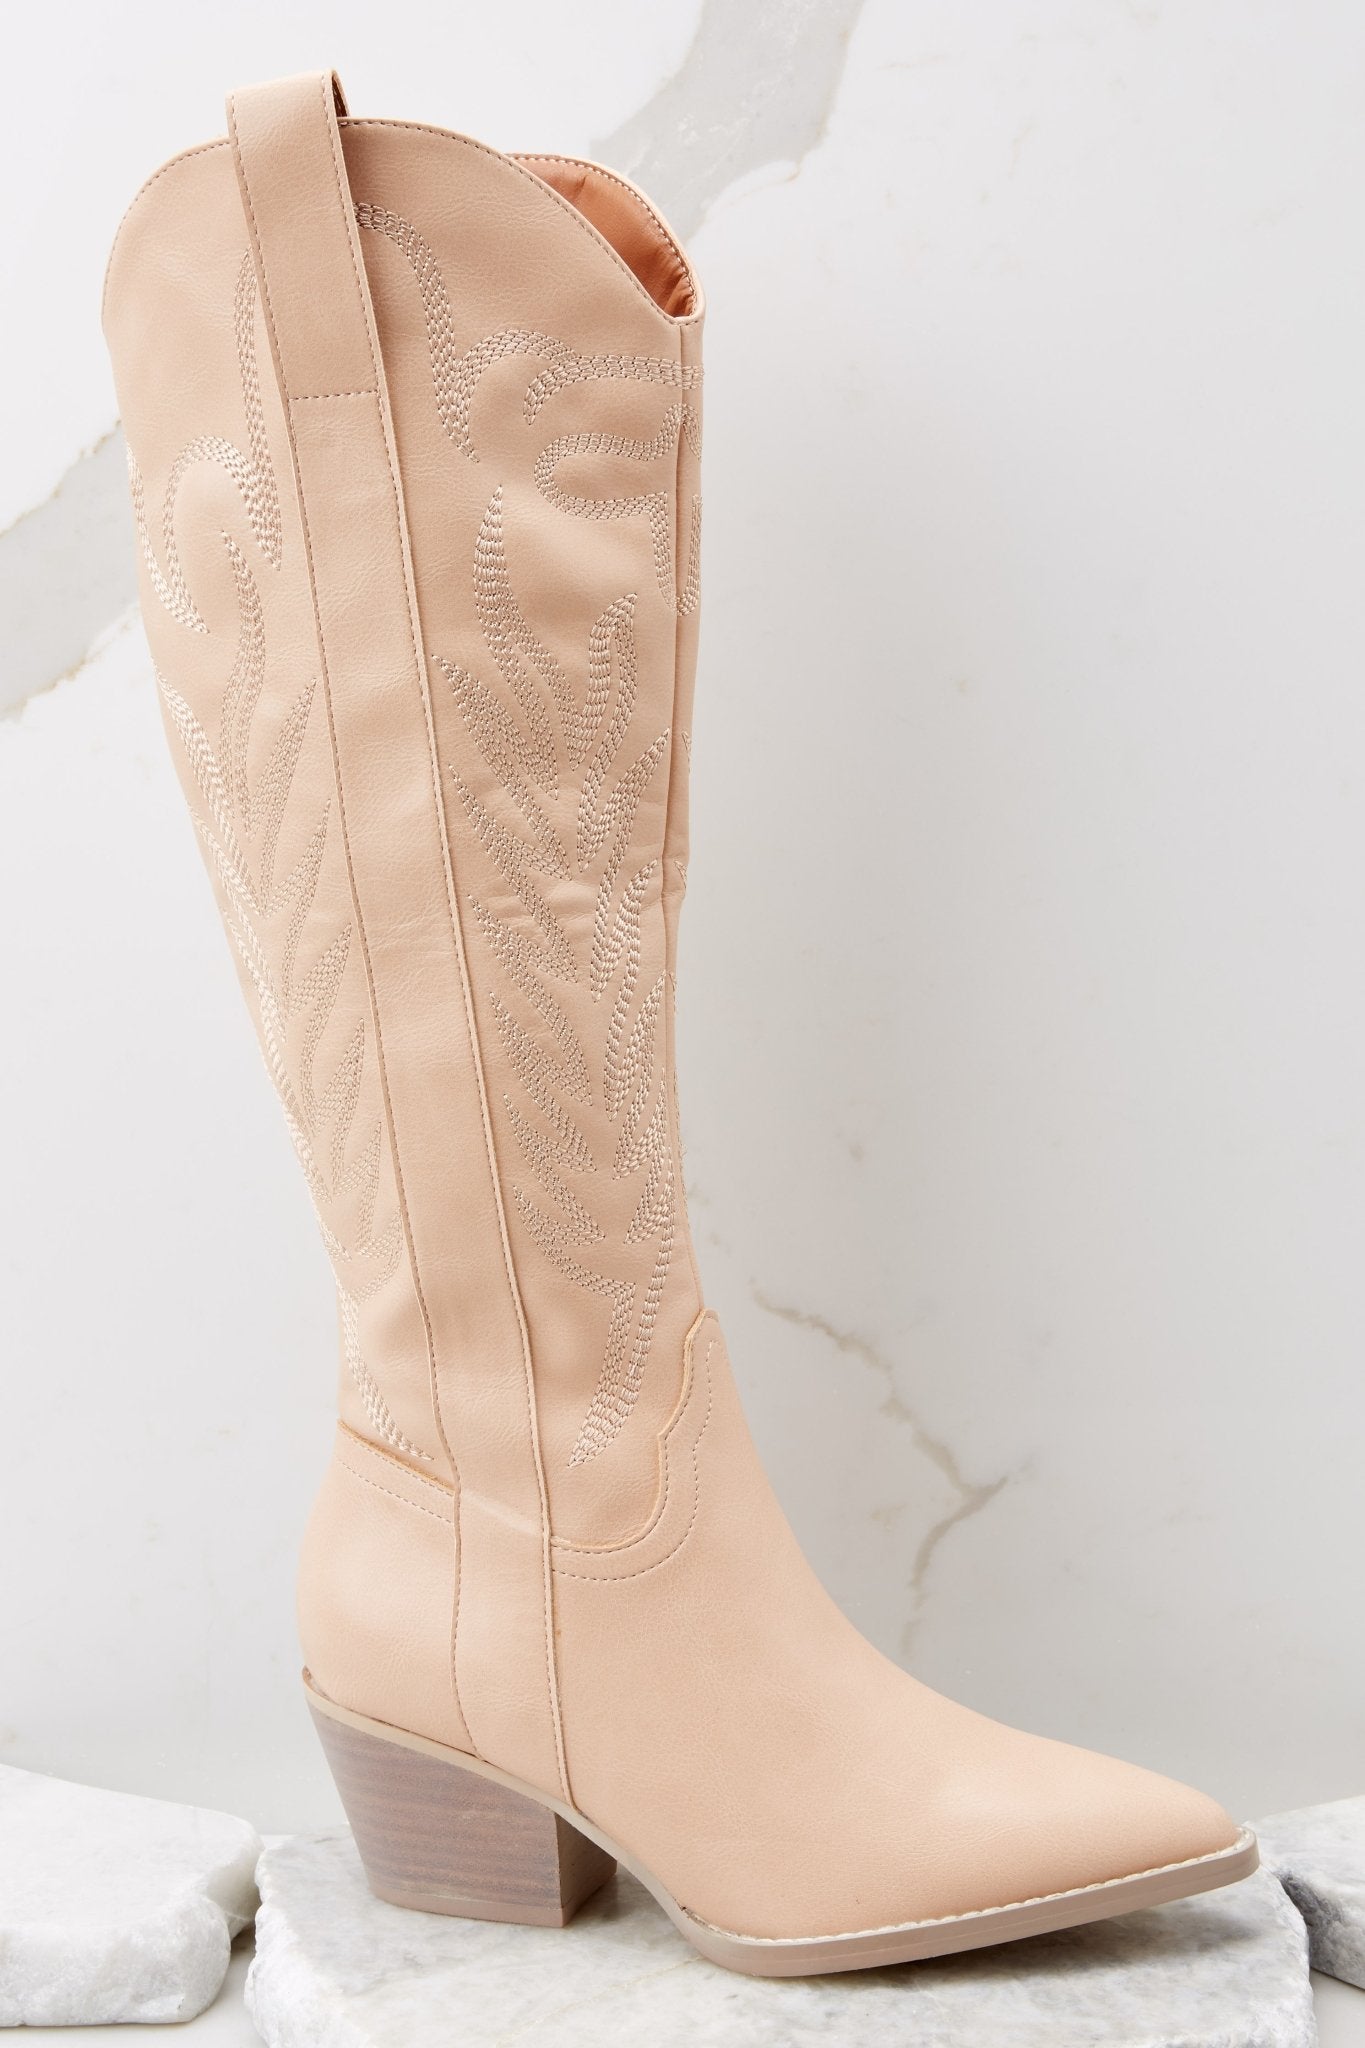 Ankle Boots, Booties & Tall Boots for Women